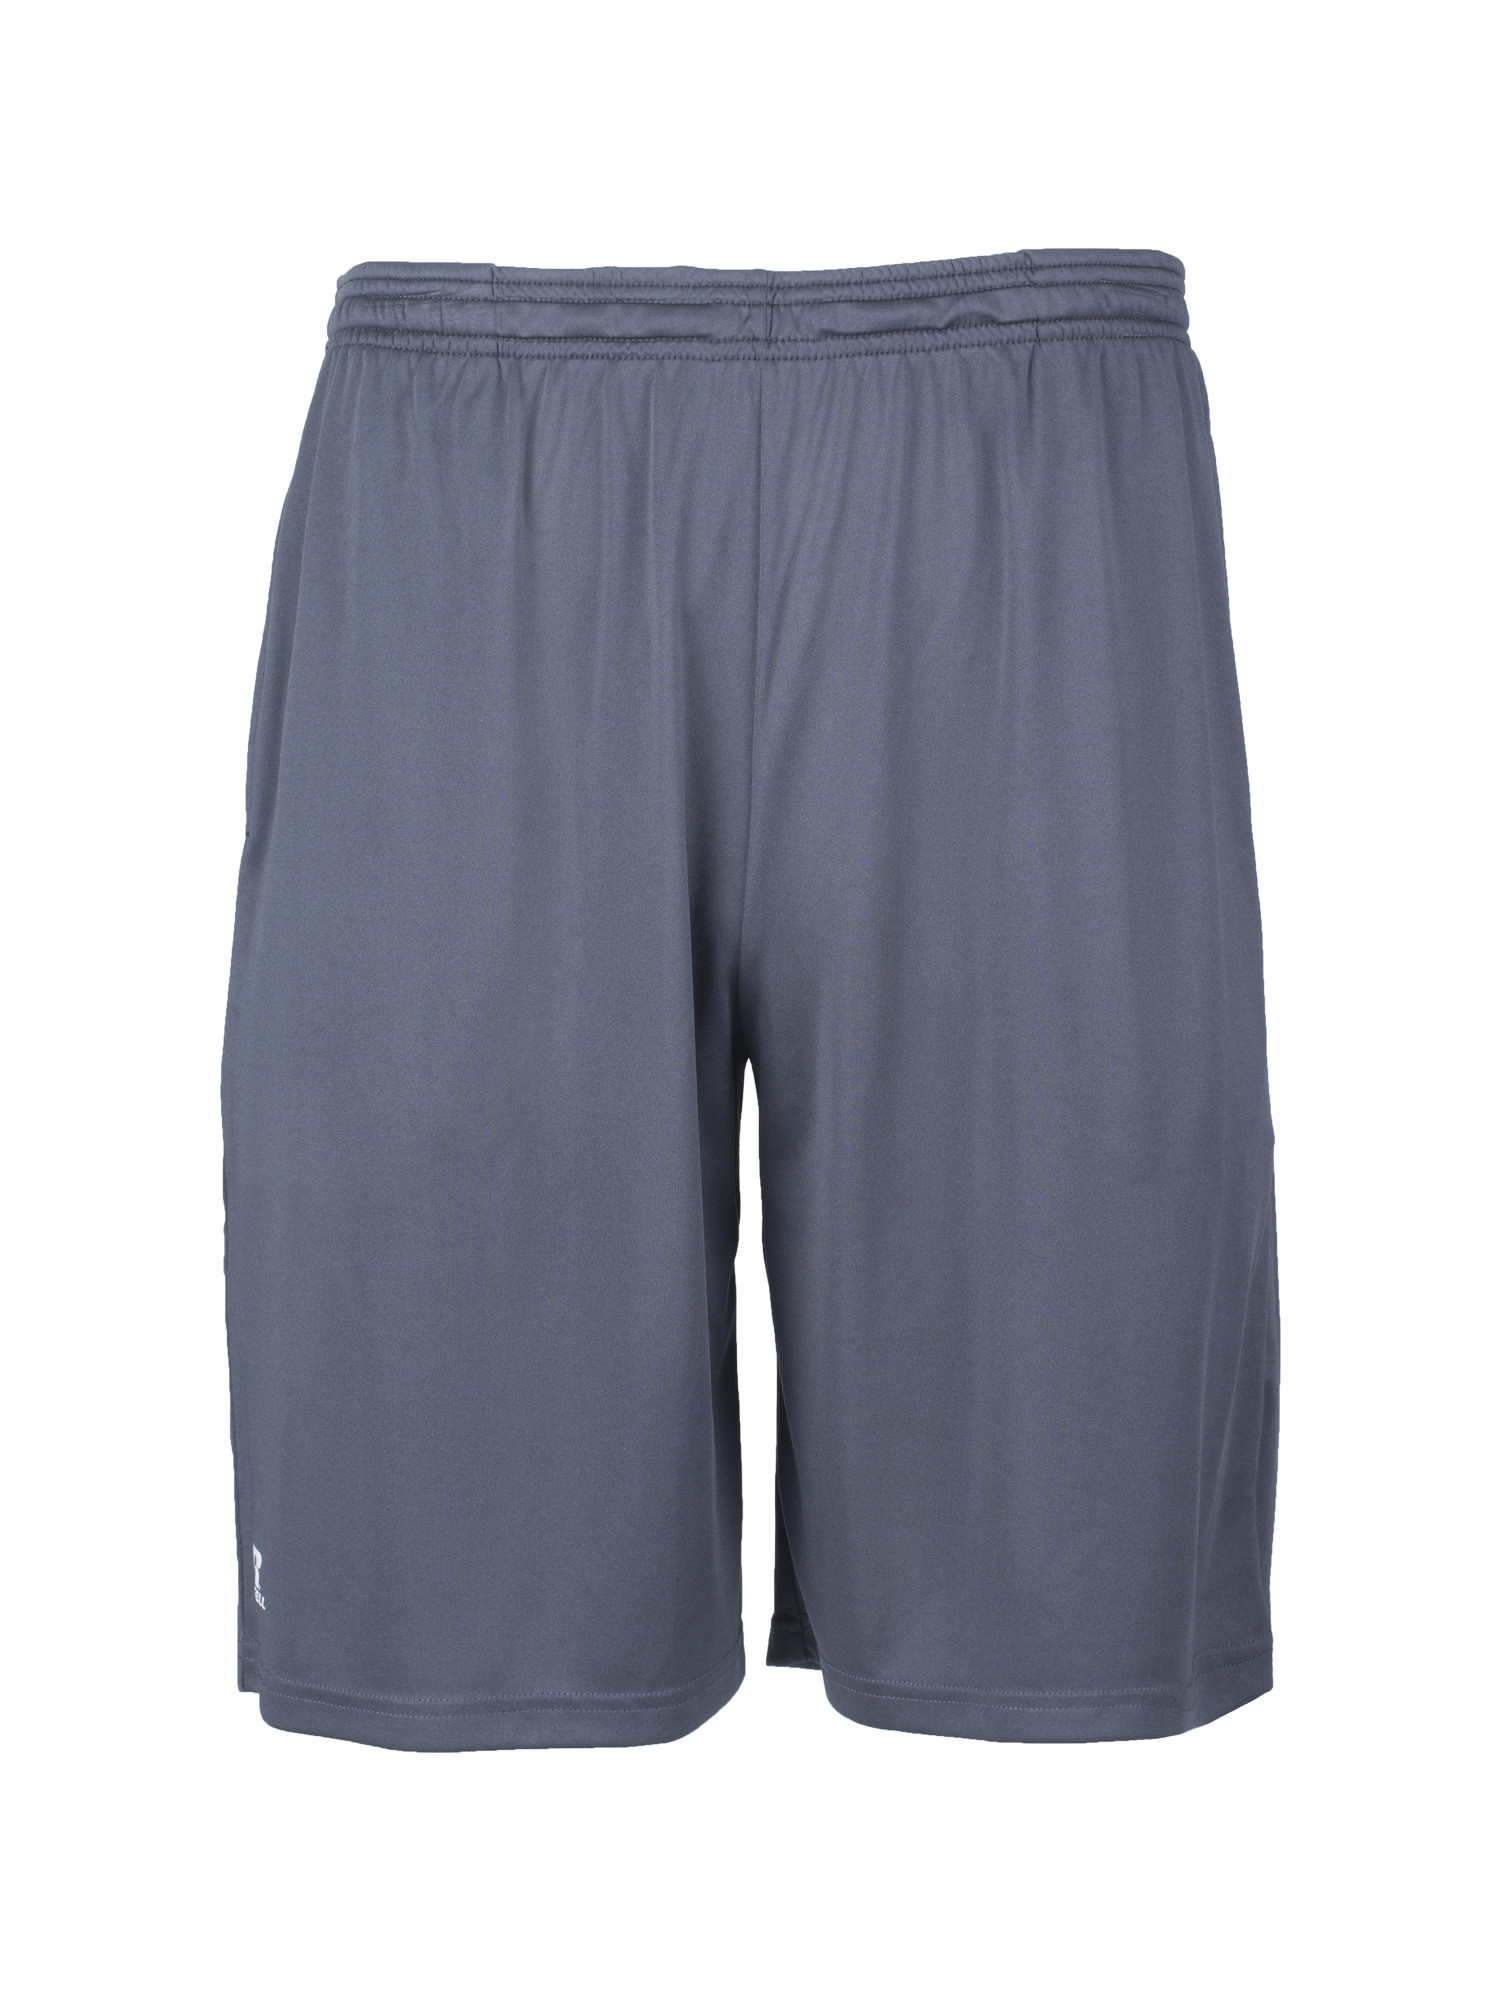 Russell Athletic Men's and Big Men's 10